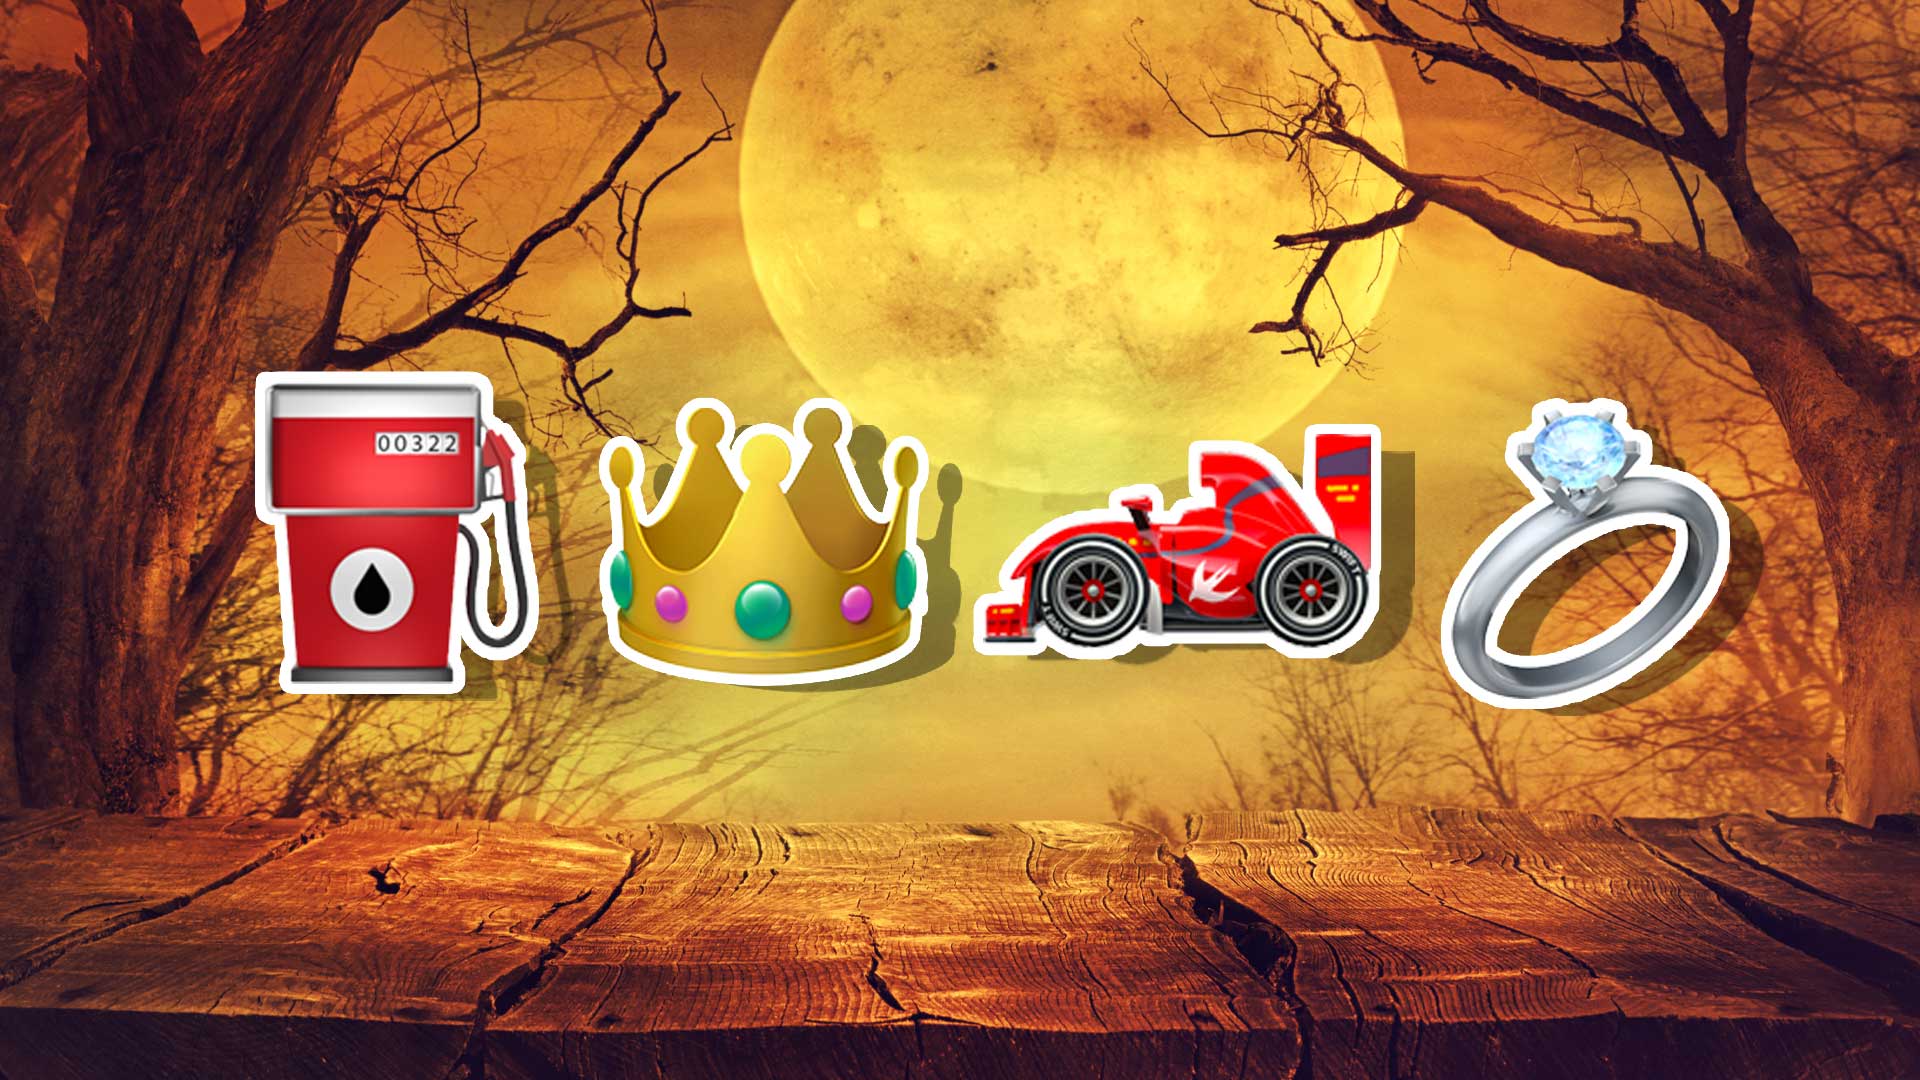 Halloween emojis including a petrol pump, race car, a crown, and a ring